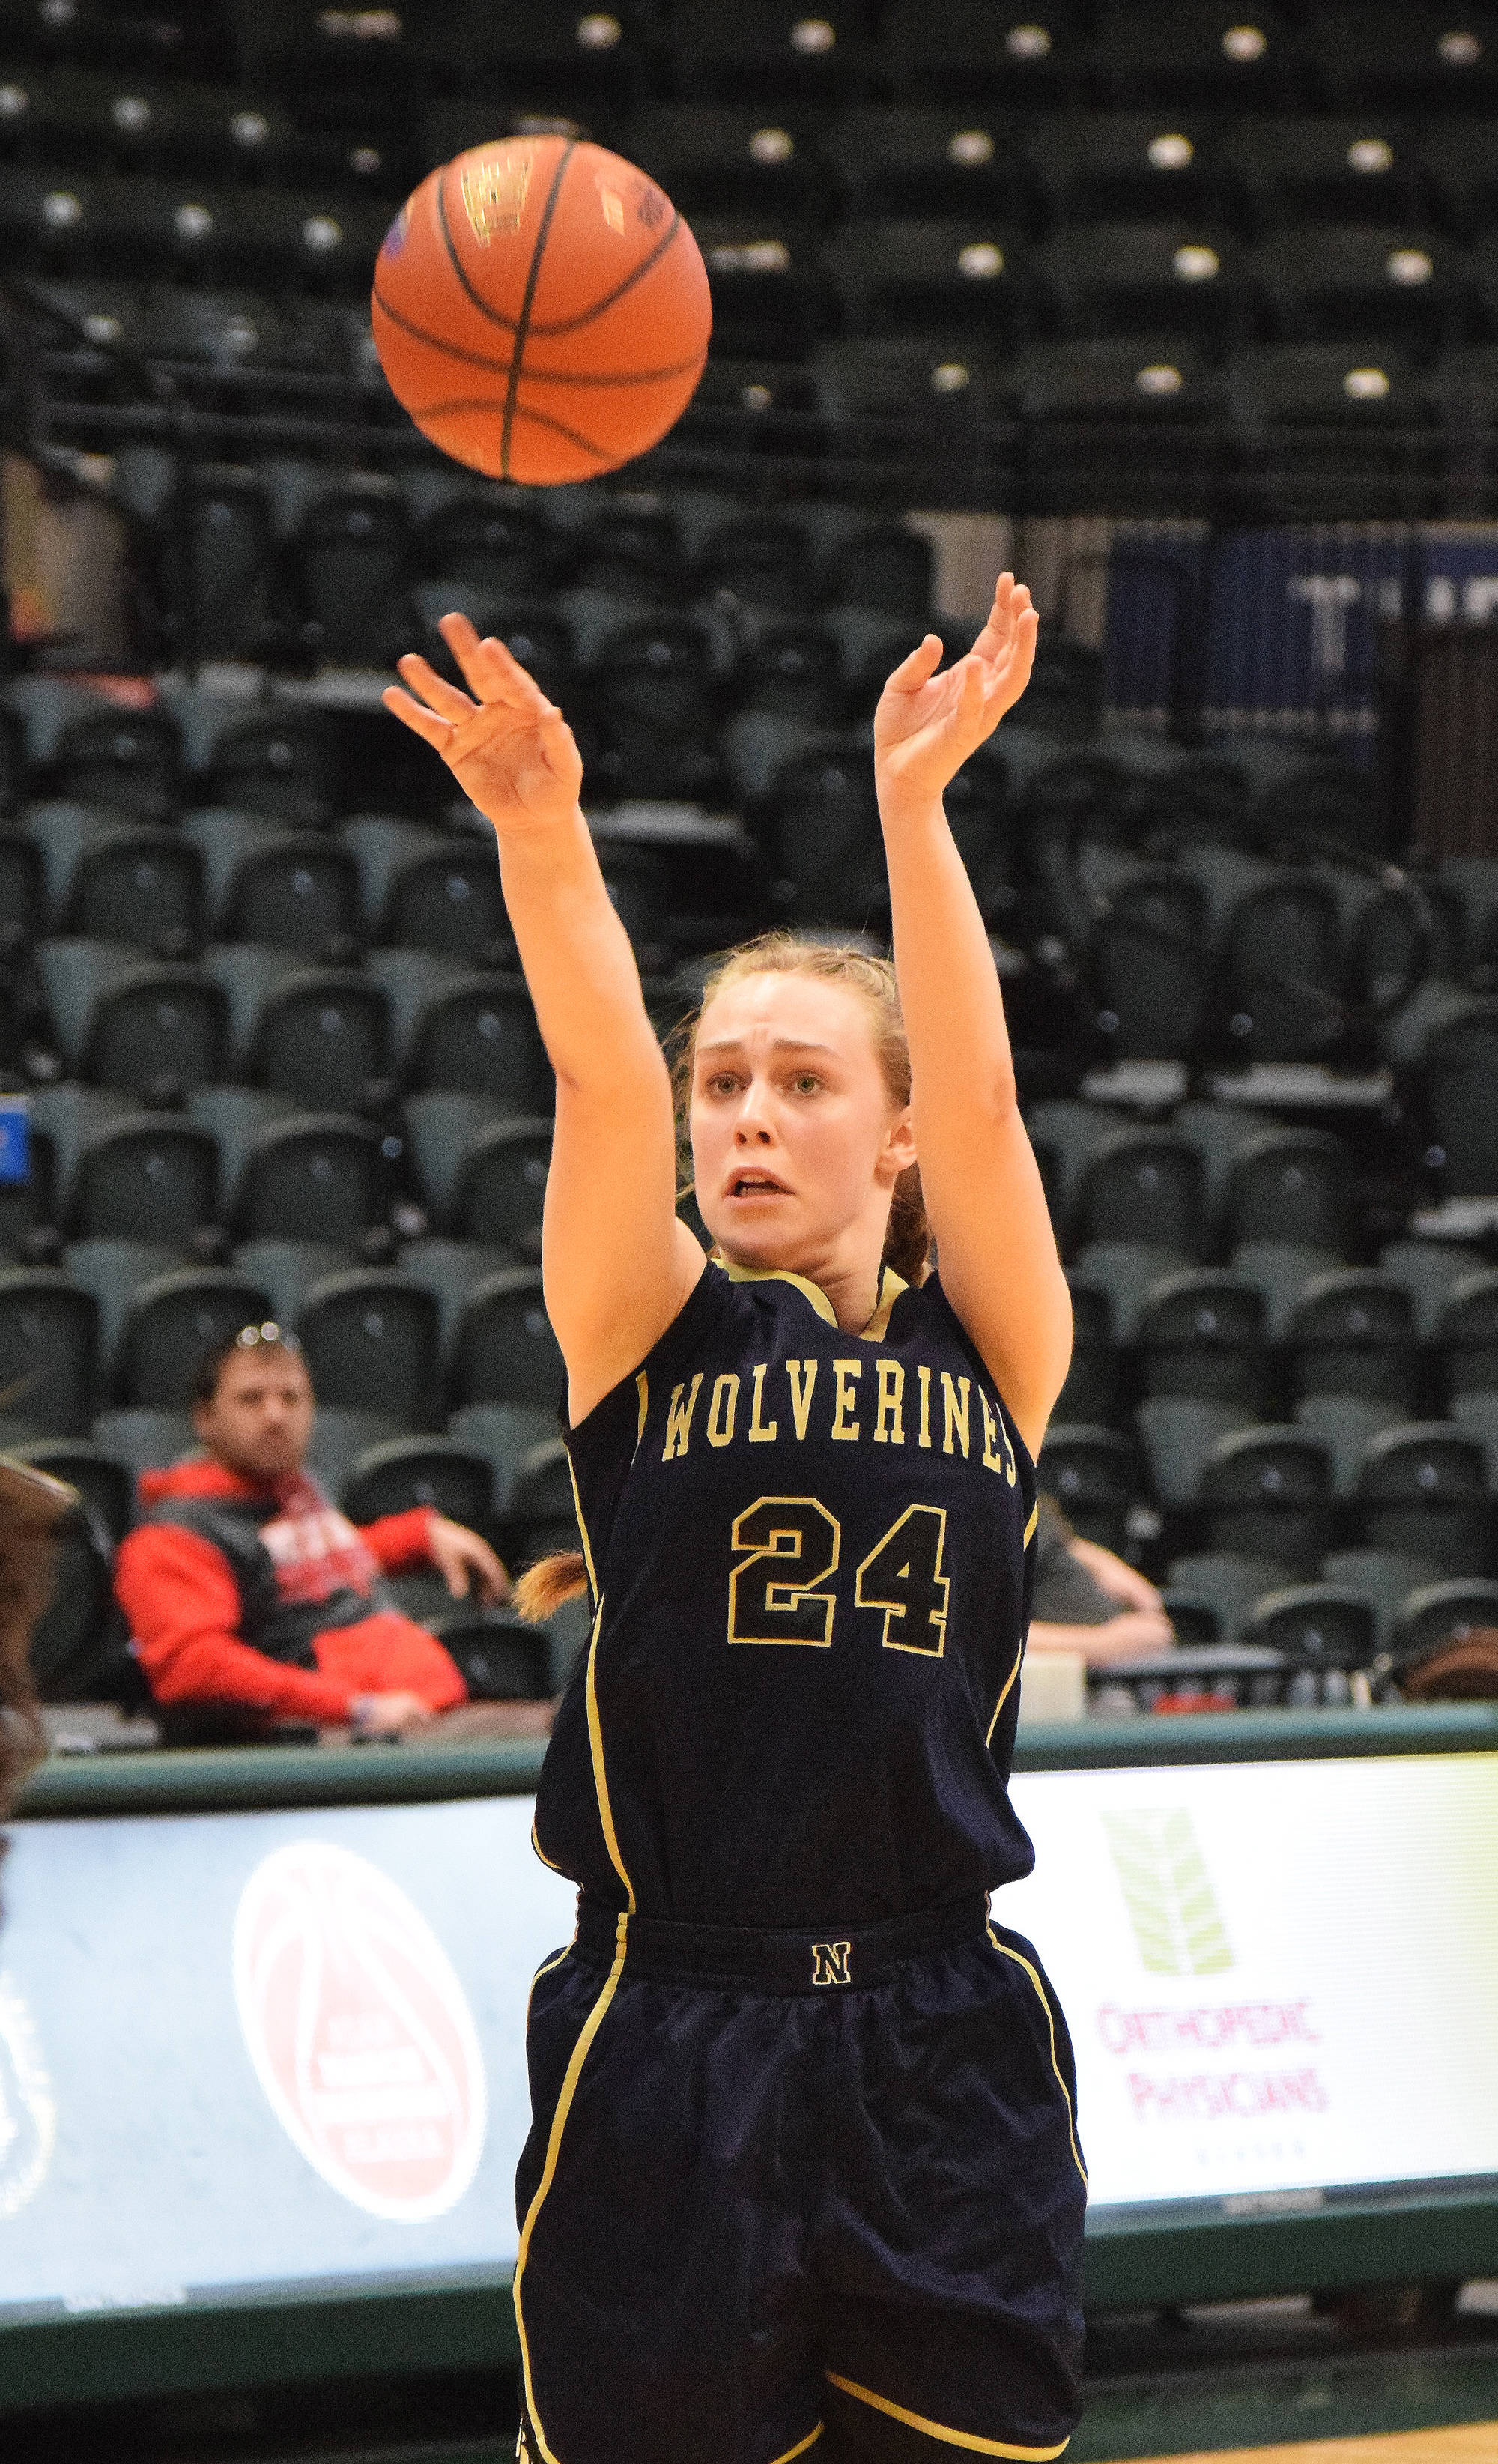 Ninilchik’s Isabella Koch releases a 3-pointer Saturday against Kake in the Class 1A girls state tournament fourth-place game at the Alaska Airlines Center in Anchorage. (Photo by Joey Klecka/Peninsula Clarion)